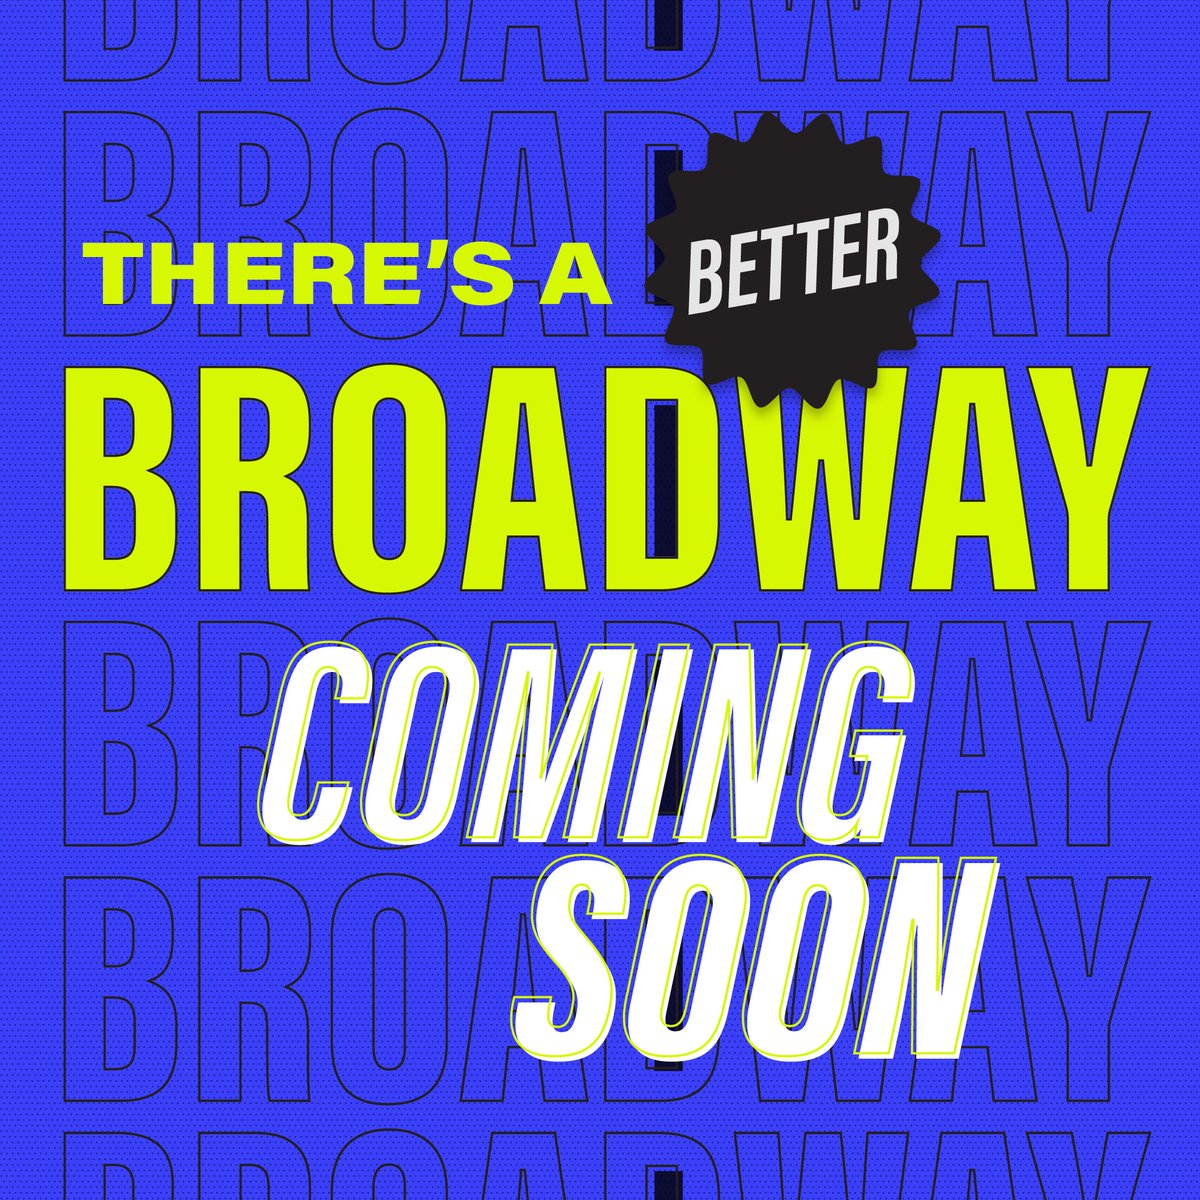 A Better Broadway is coming soon! 🚧 One of @cityofokc’s Better Streets, Safer City initiatives is to make Broadway a safer and more walkable street in @AutoAlleyOKC. #BetterBroadwayOKC #BetterSaferOKC